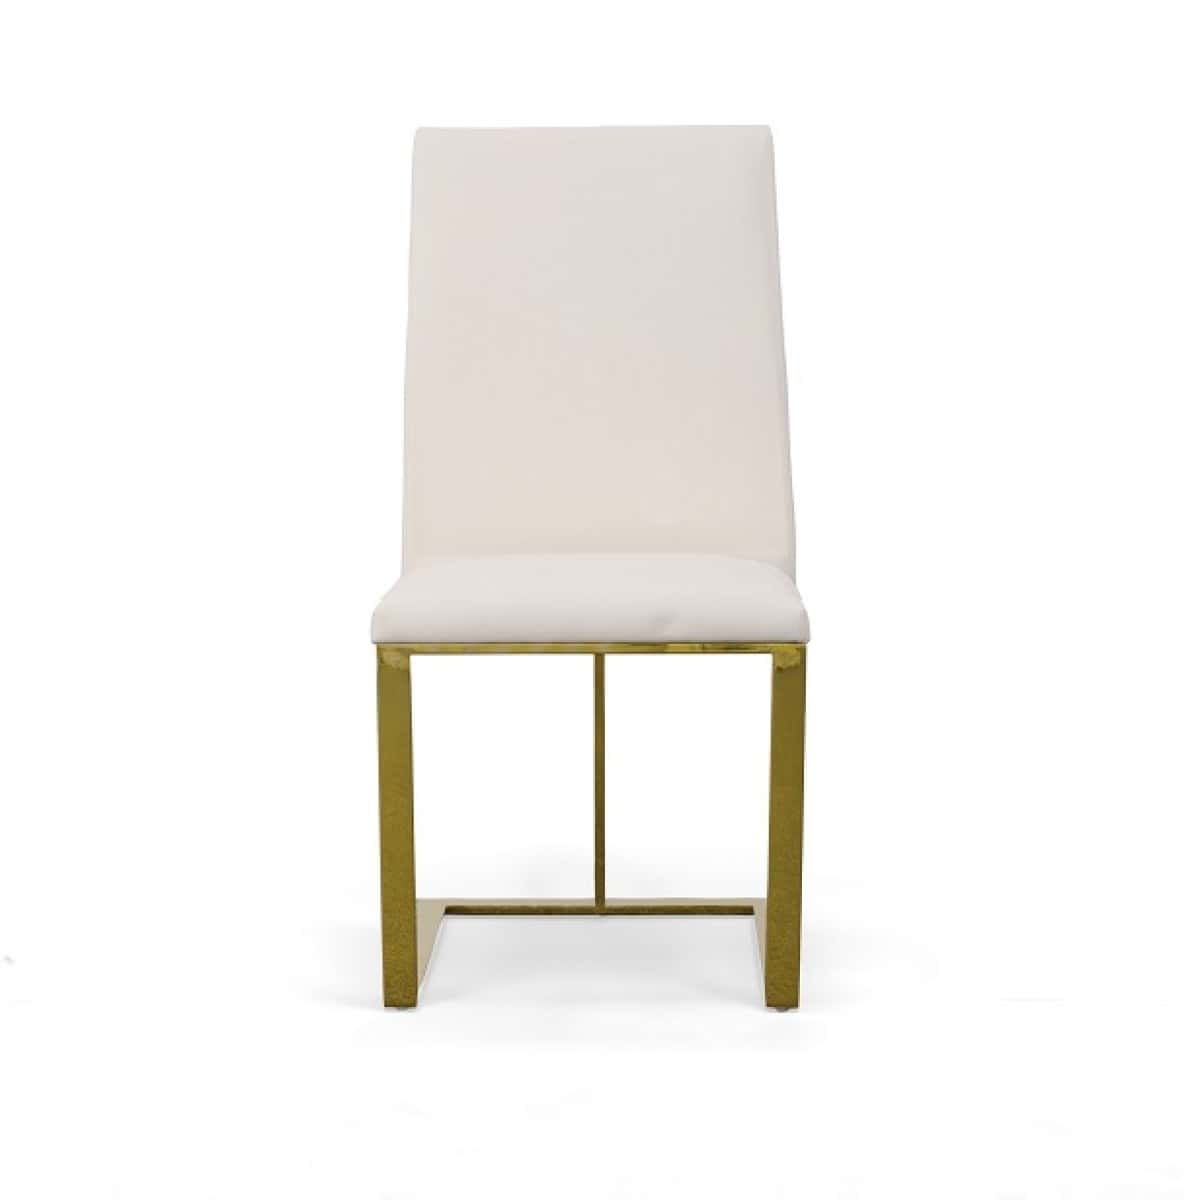 Modrest Frankie - Contemporary White & Gold Dining Chair by VIG Furniture